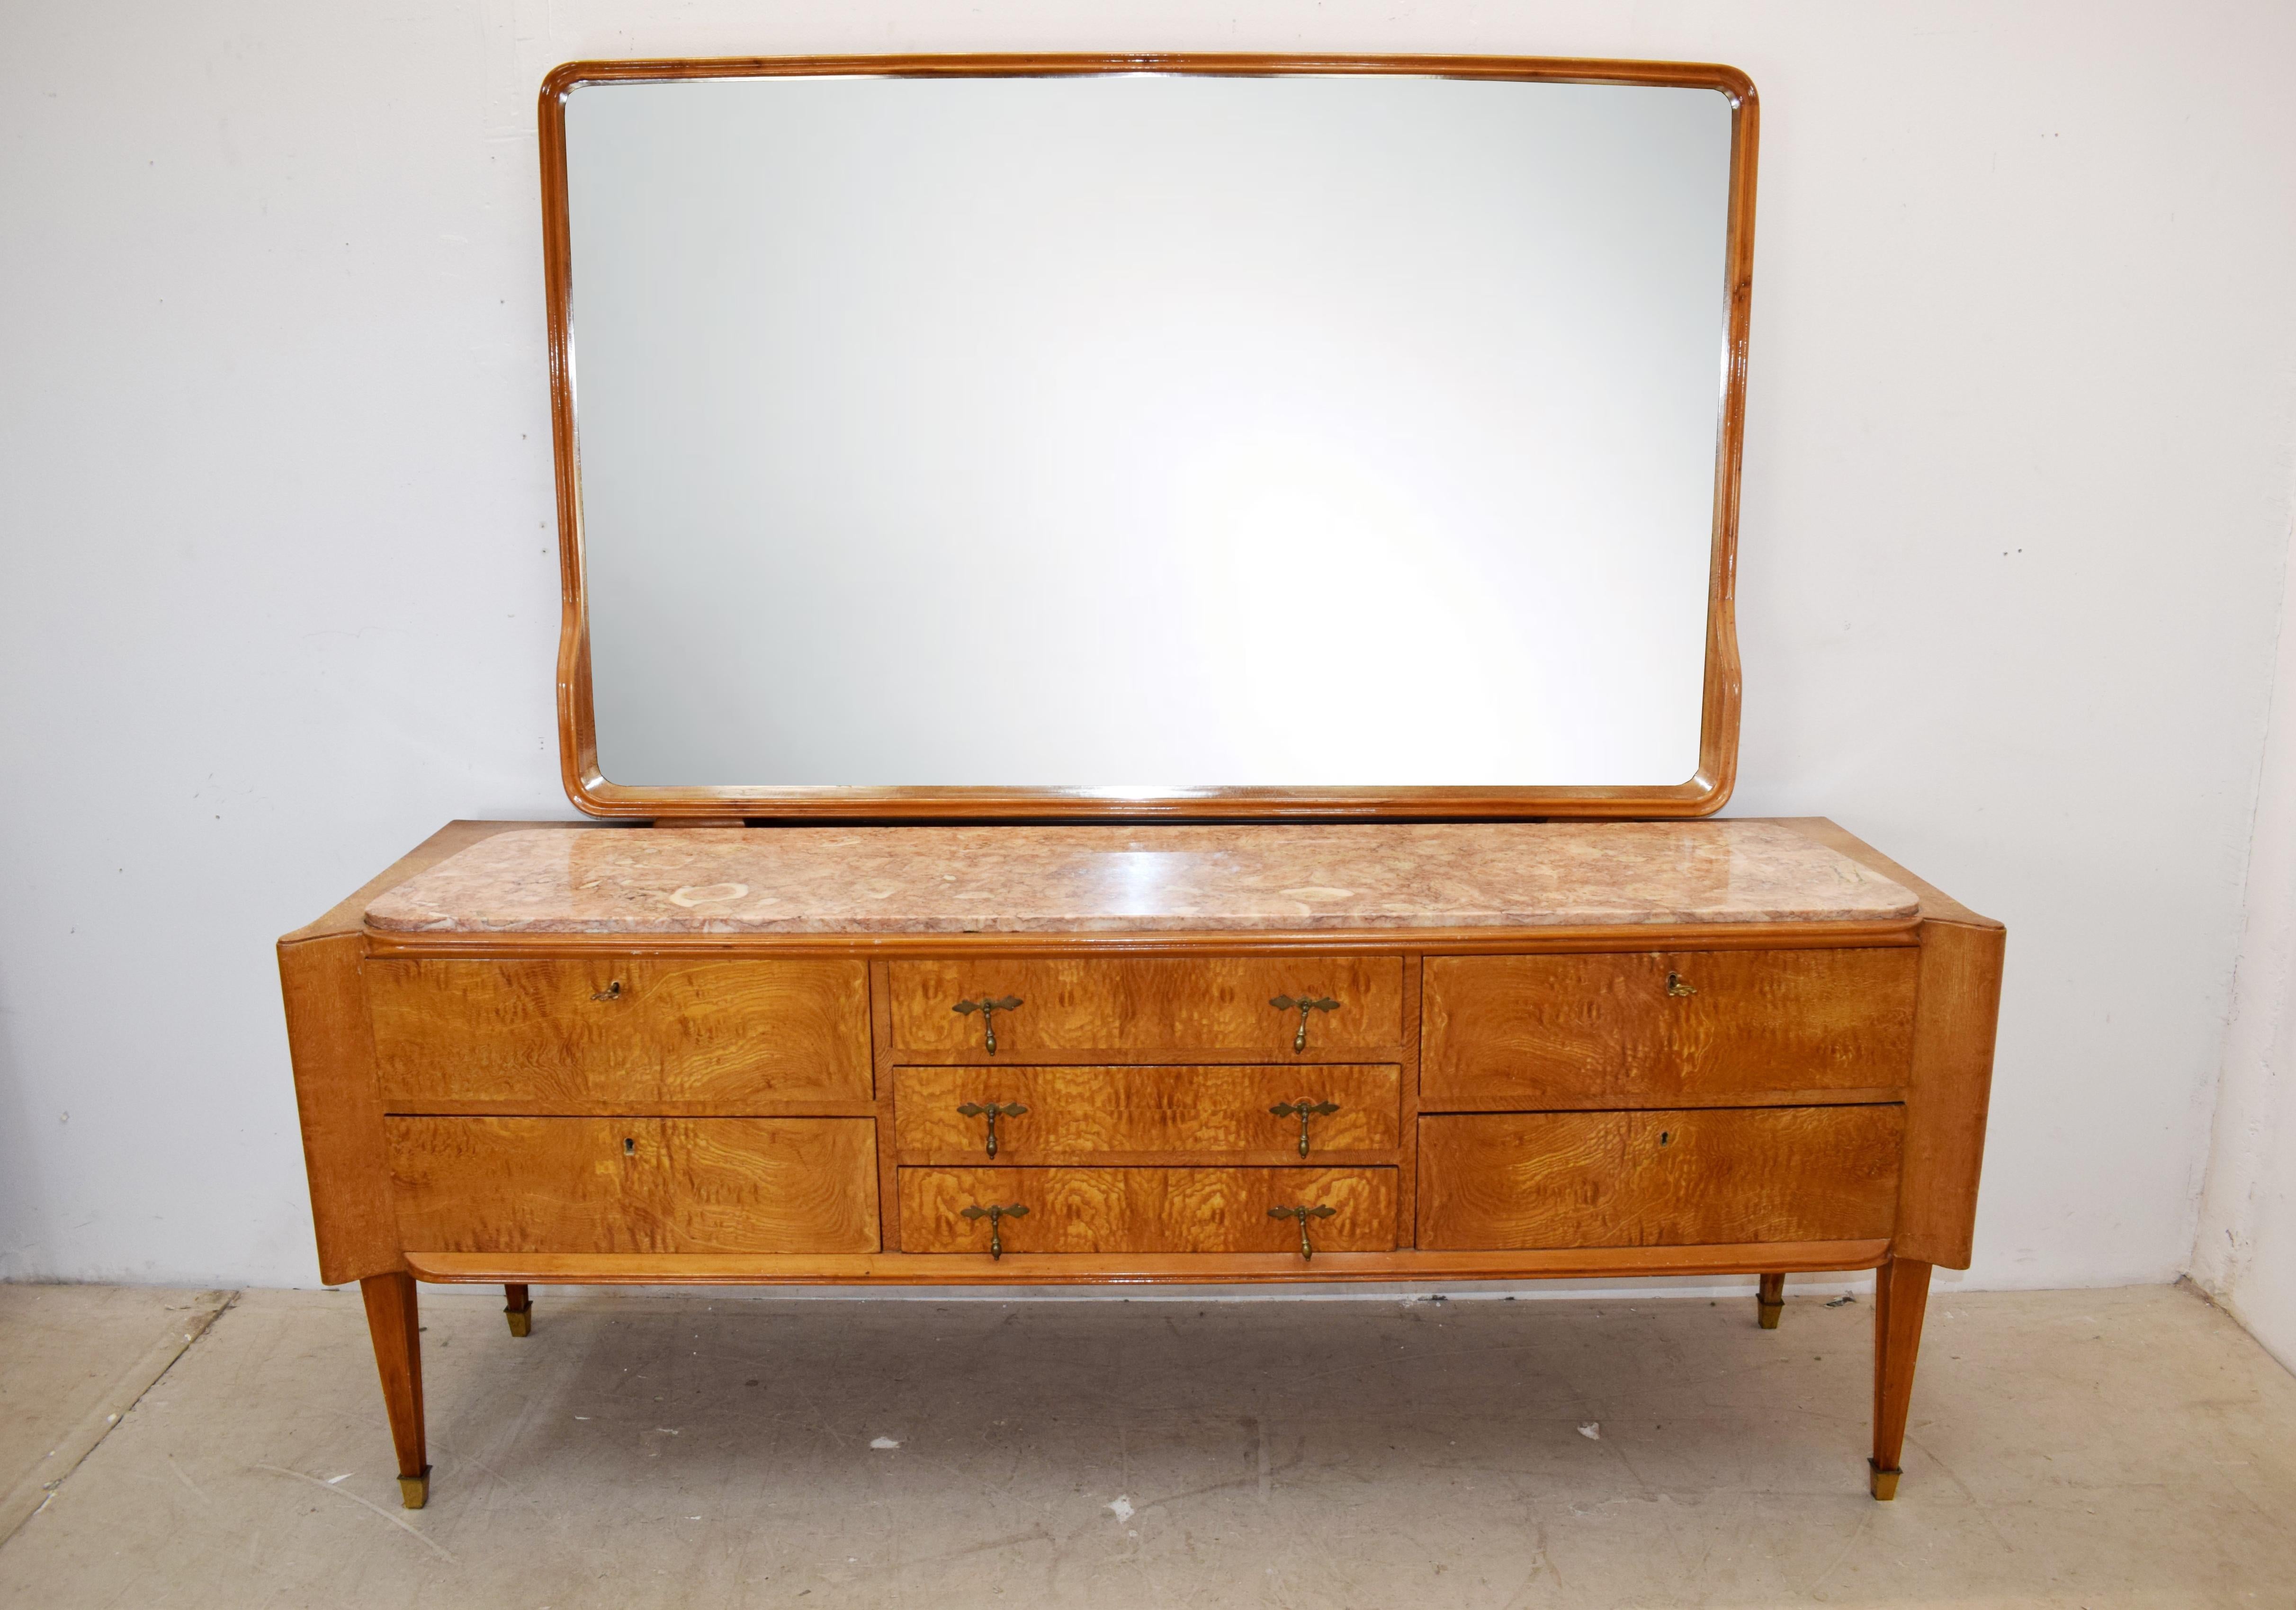 Italian chest of drawers with mirror, 1950s.
Dimensions: H= 175 cm; W= 195 cm; D=55 cm.